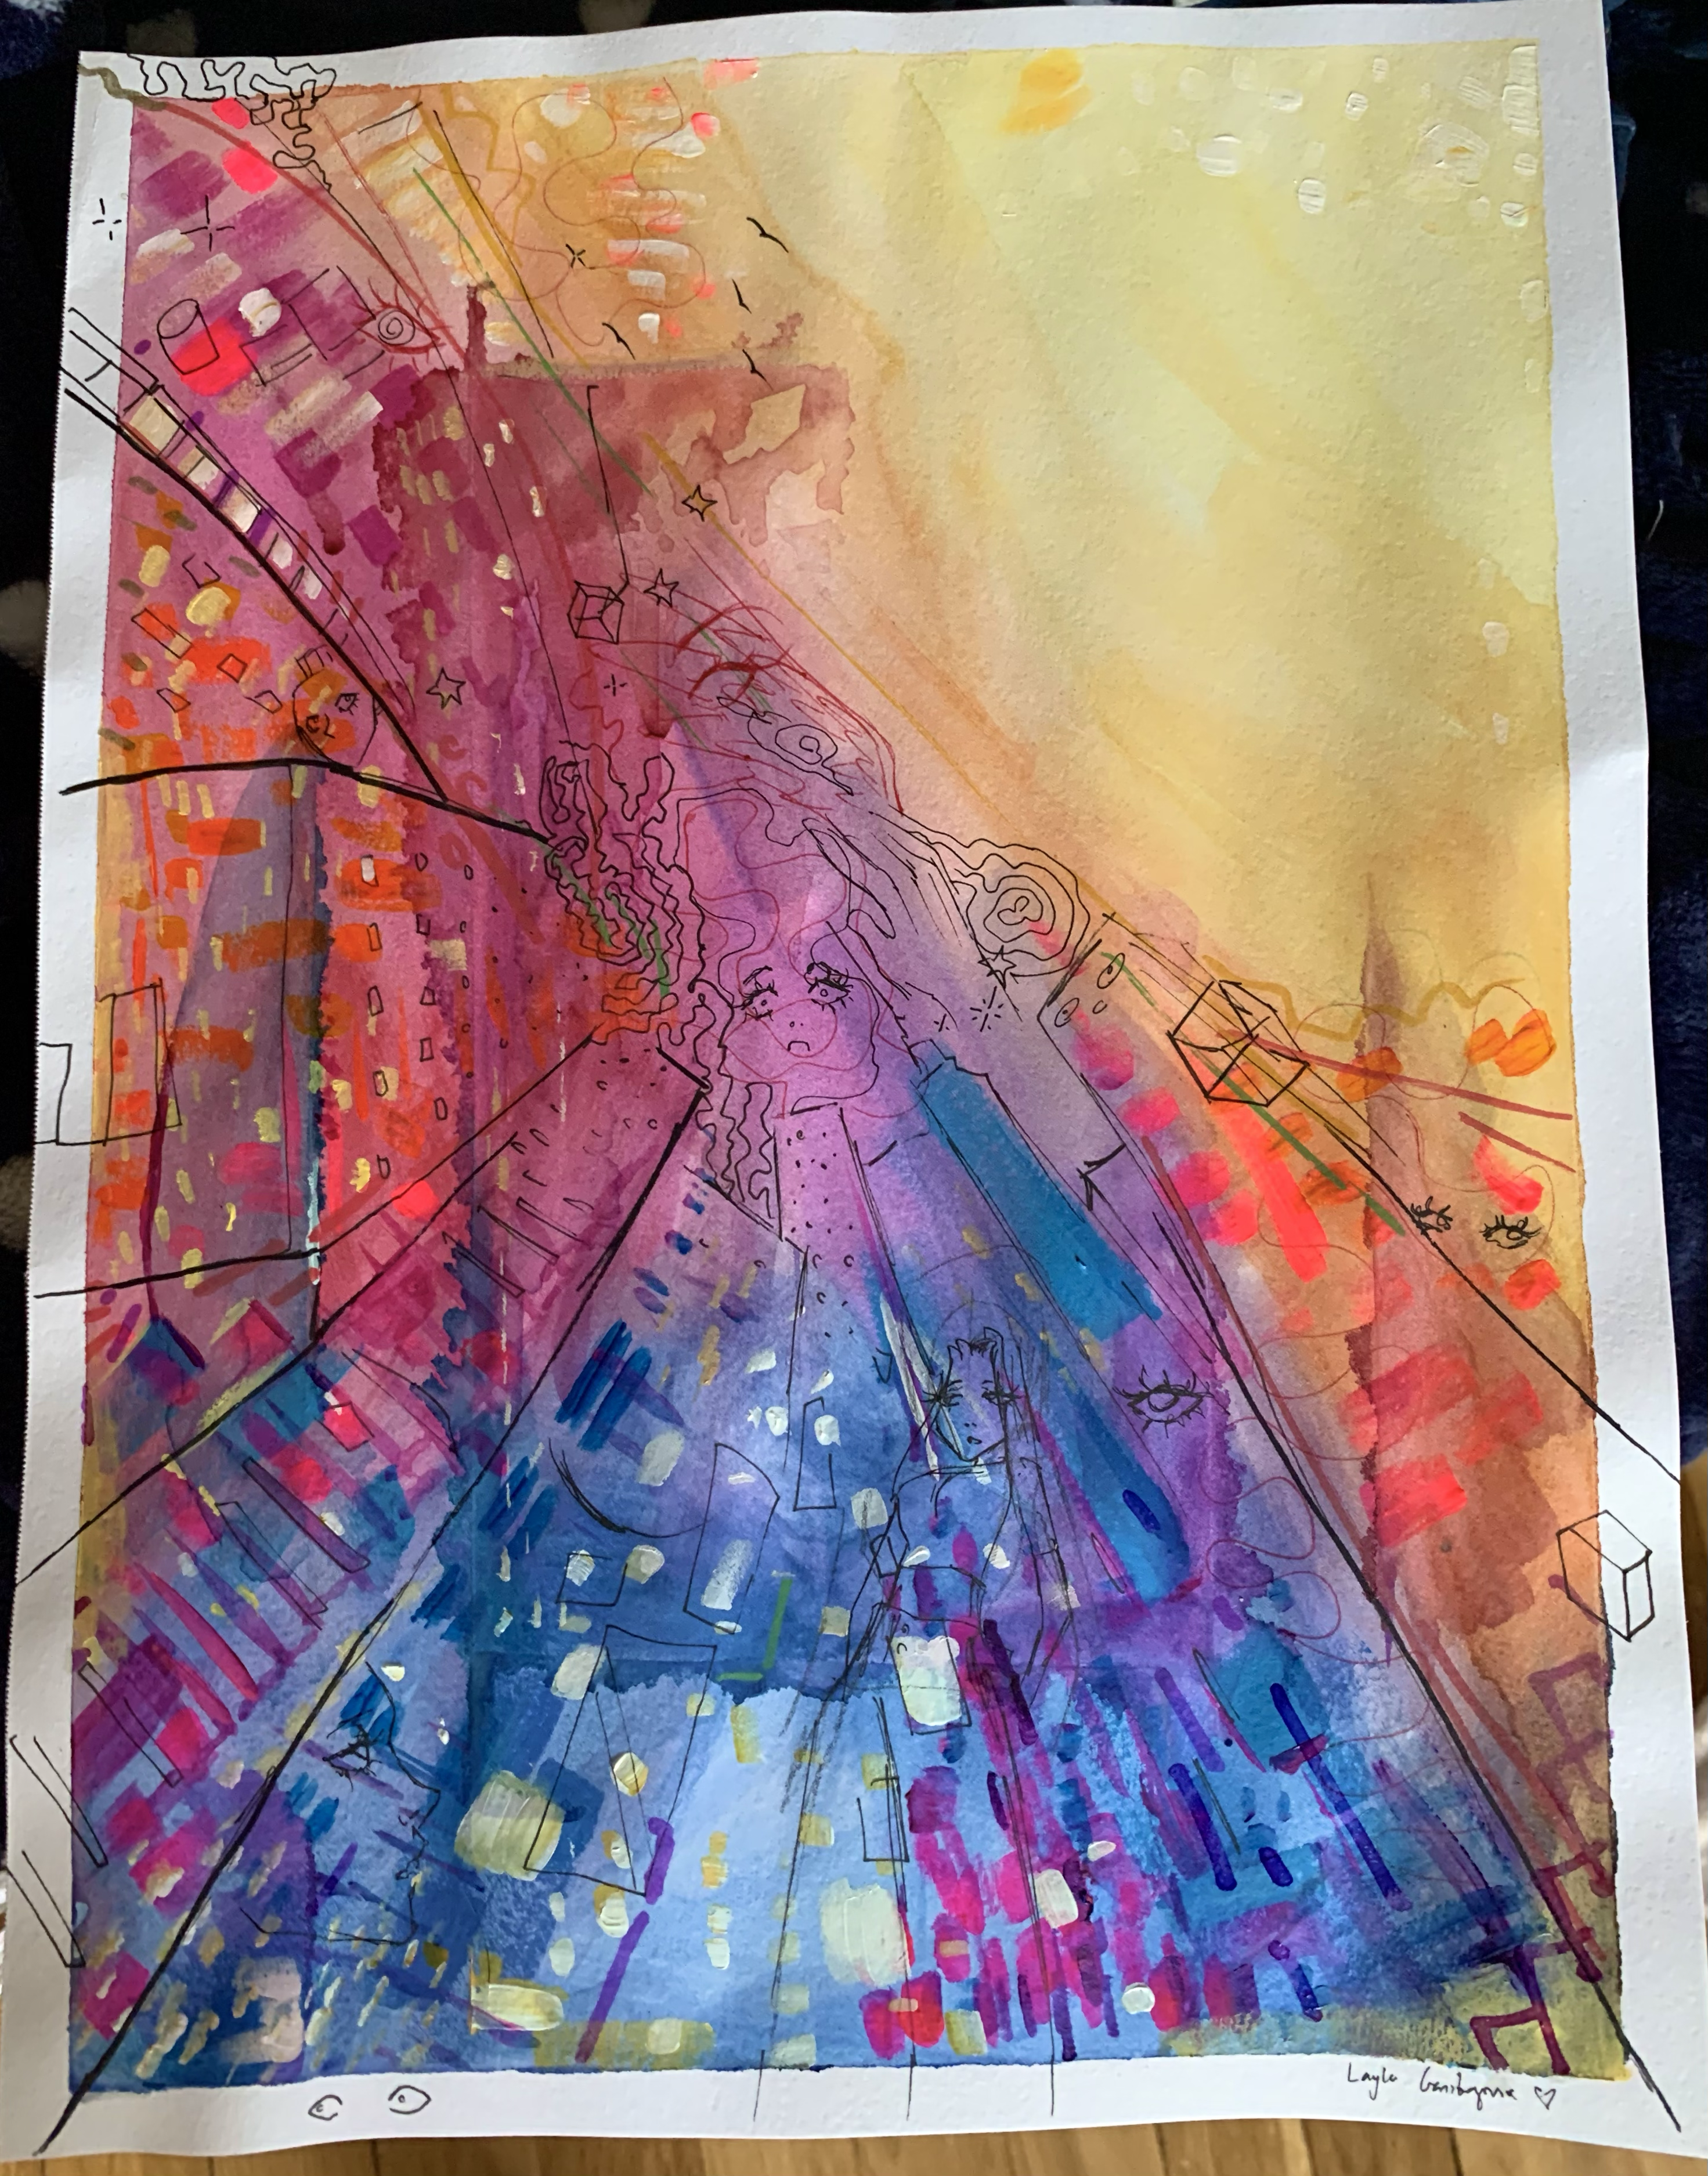 An abstract painting with a variety of colors that begin to merge toward the center of the paper.